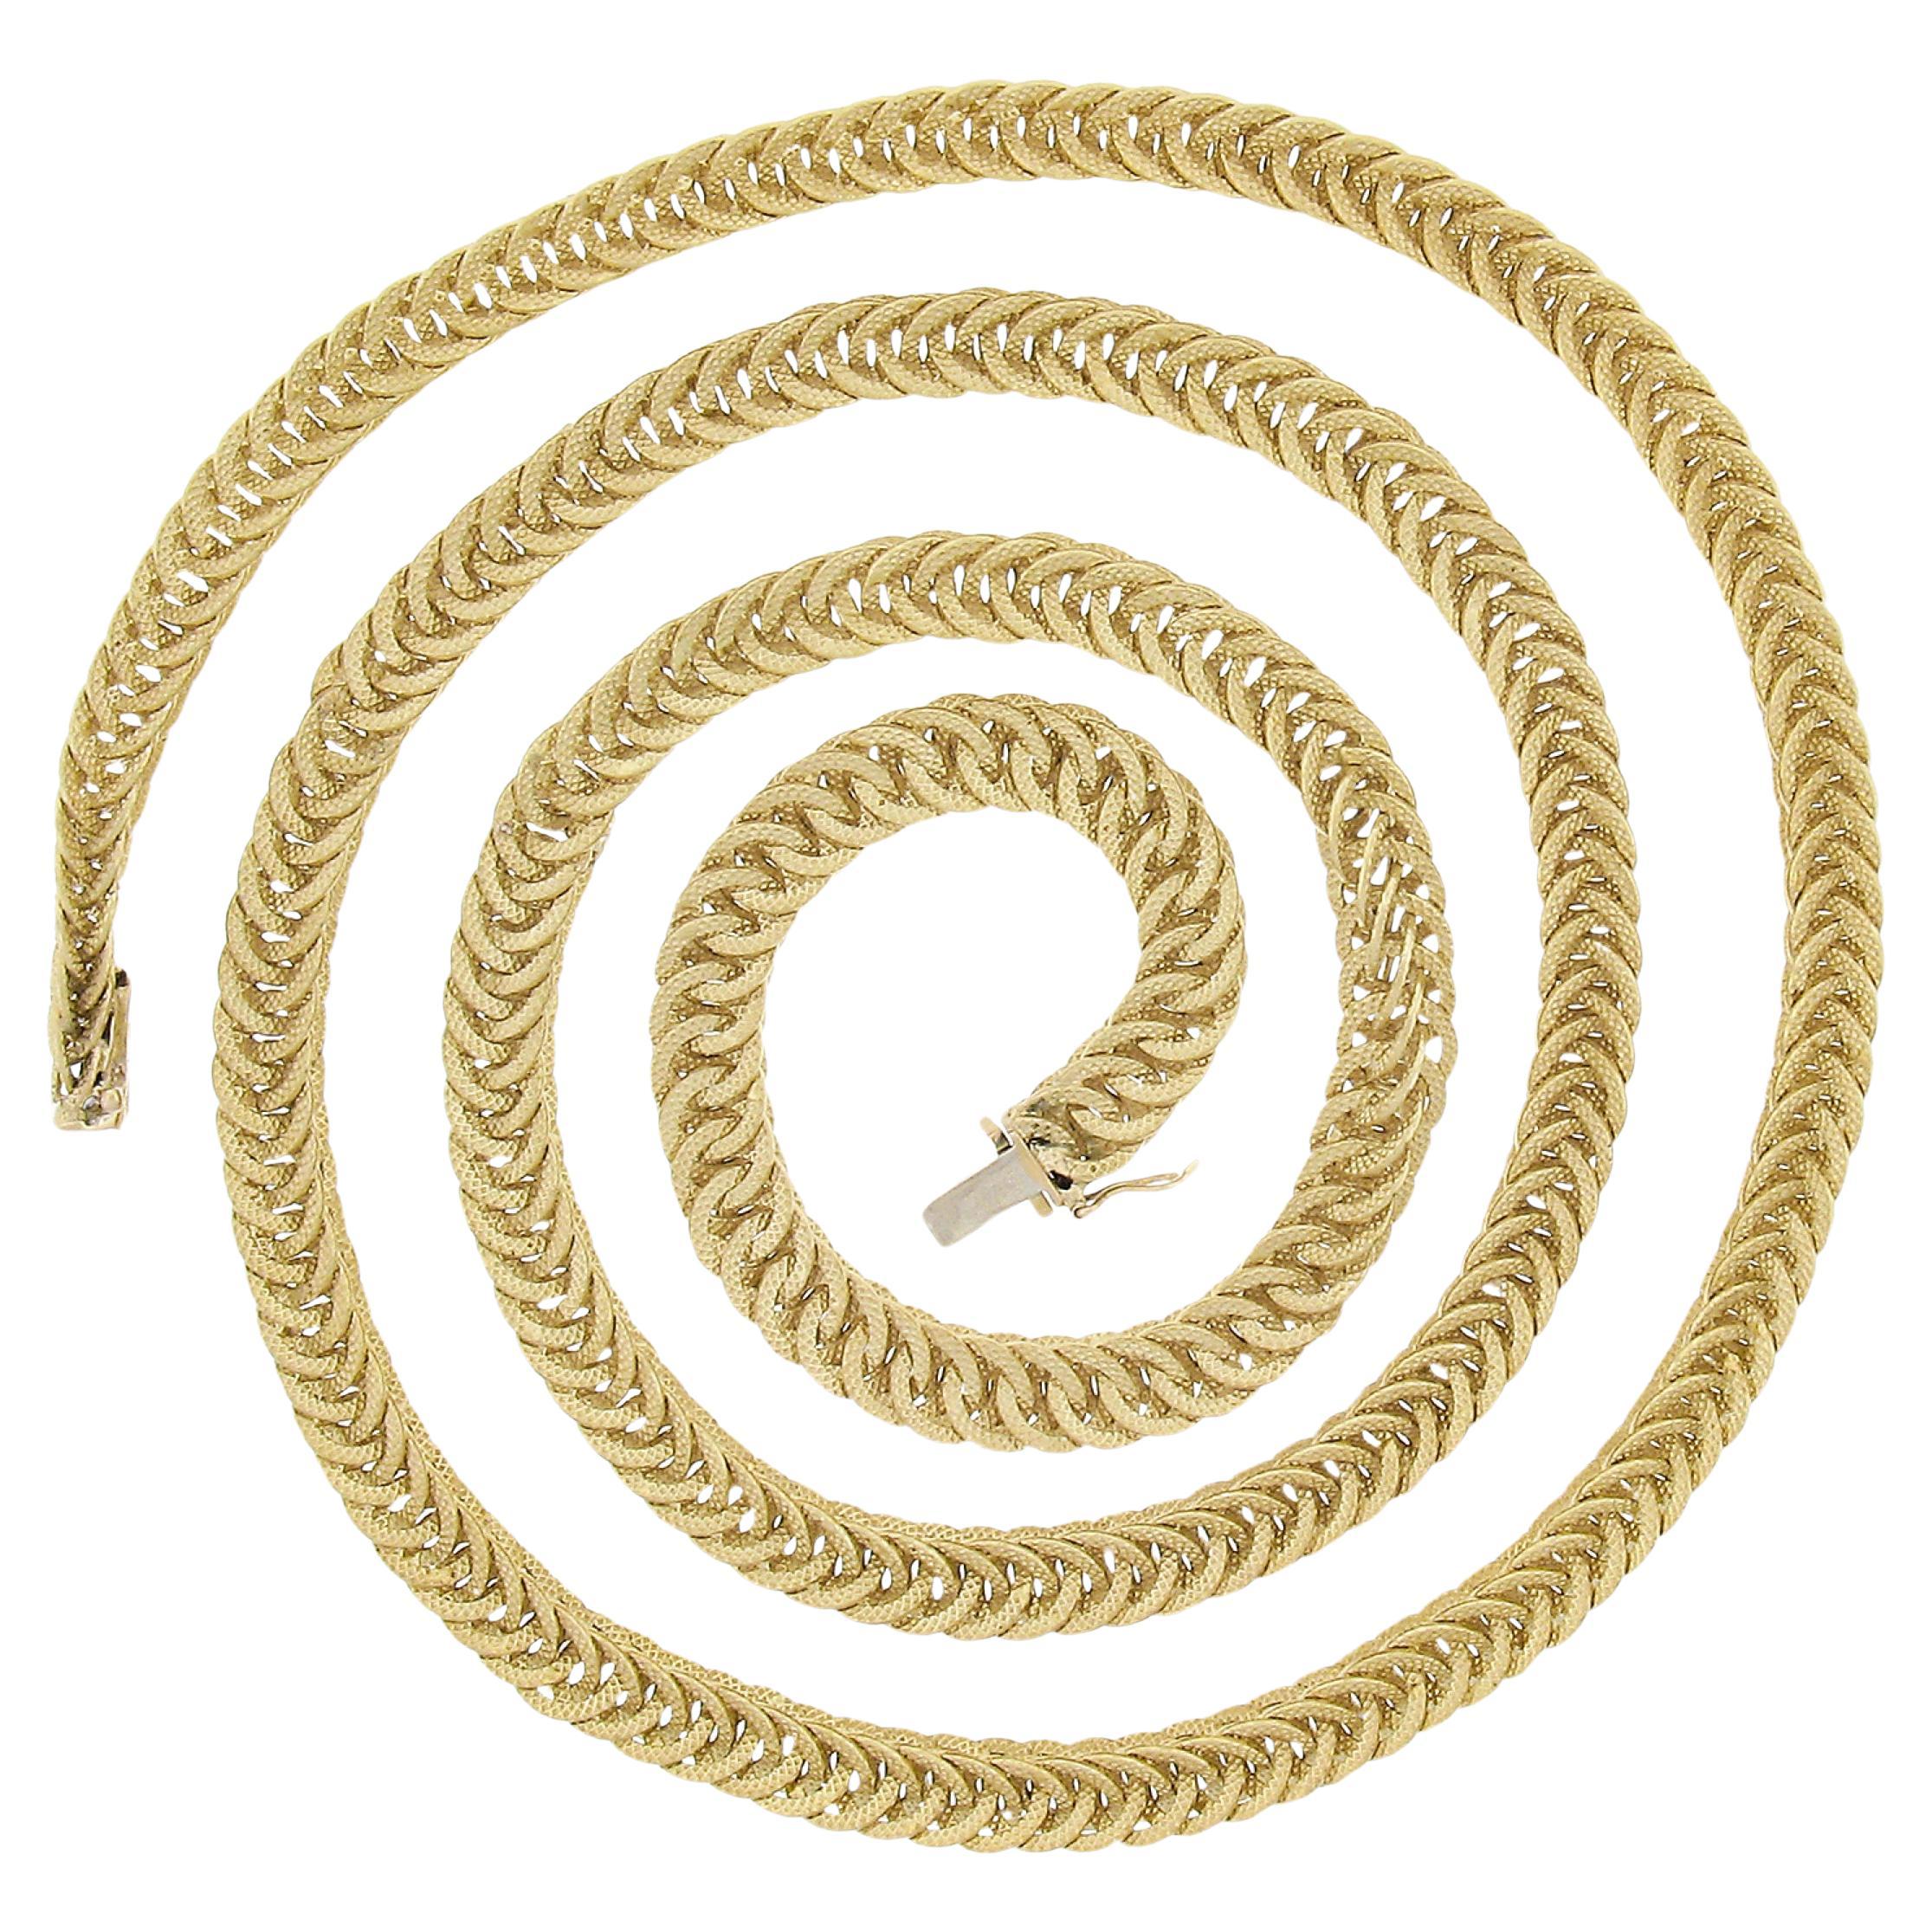 Marchisio Italian 18k Gold 35" Wide Interlocking Textured 3D Link Necklace For Sale